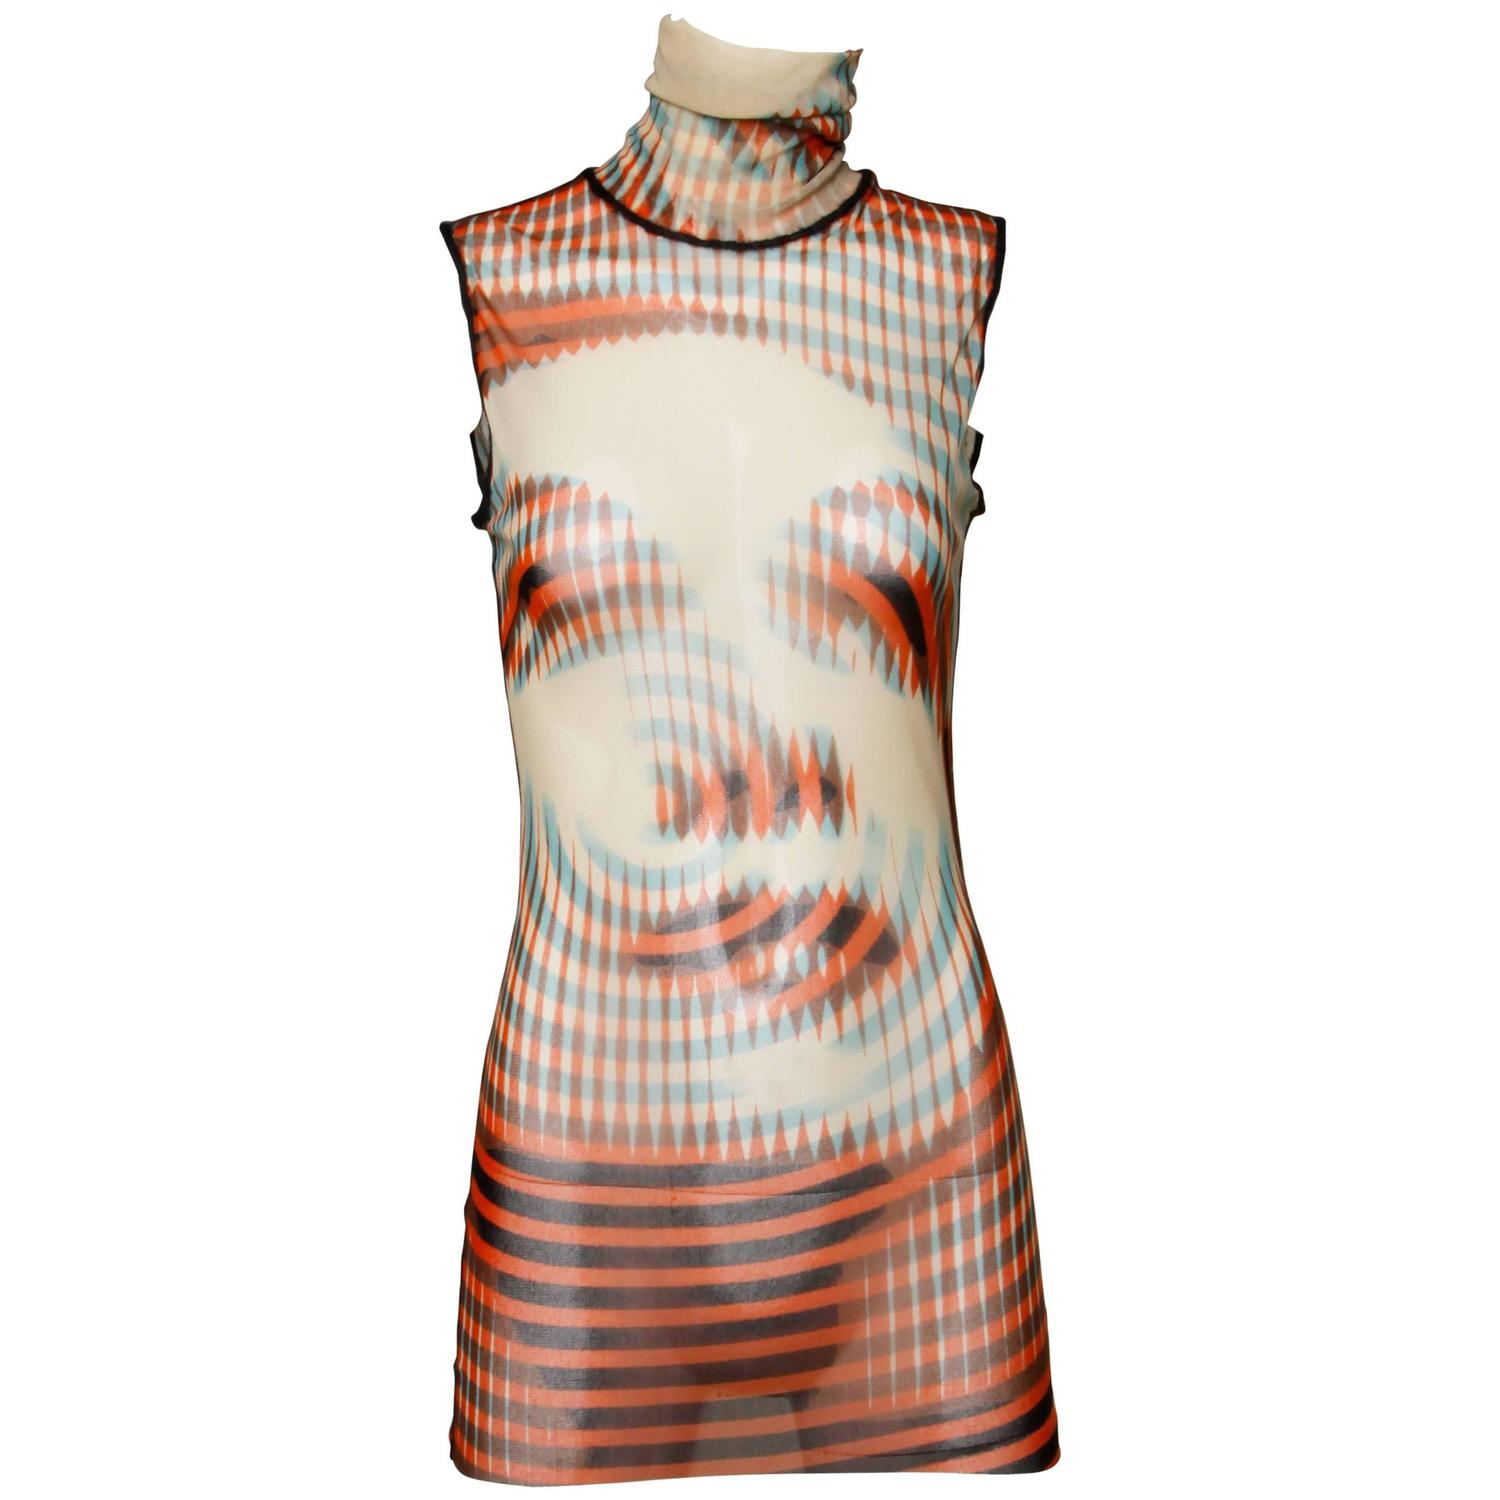 Iconic Jean Paul Gaultier Sheer Mesh 3-D Optical Illusion Face Turtle ...